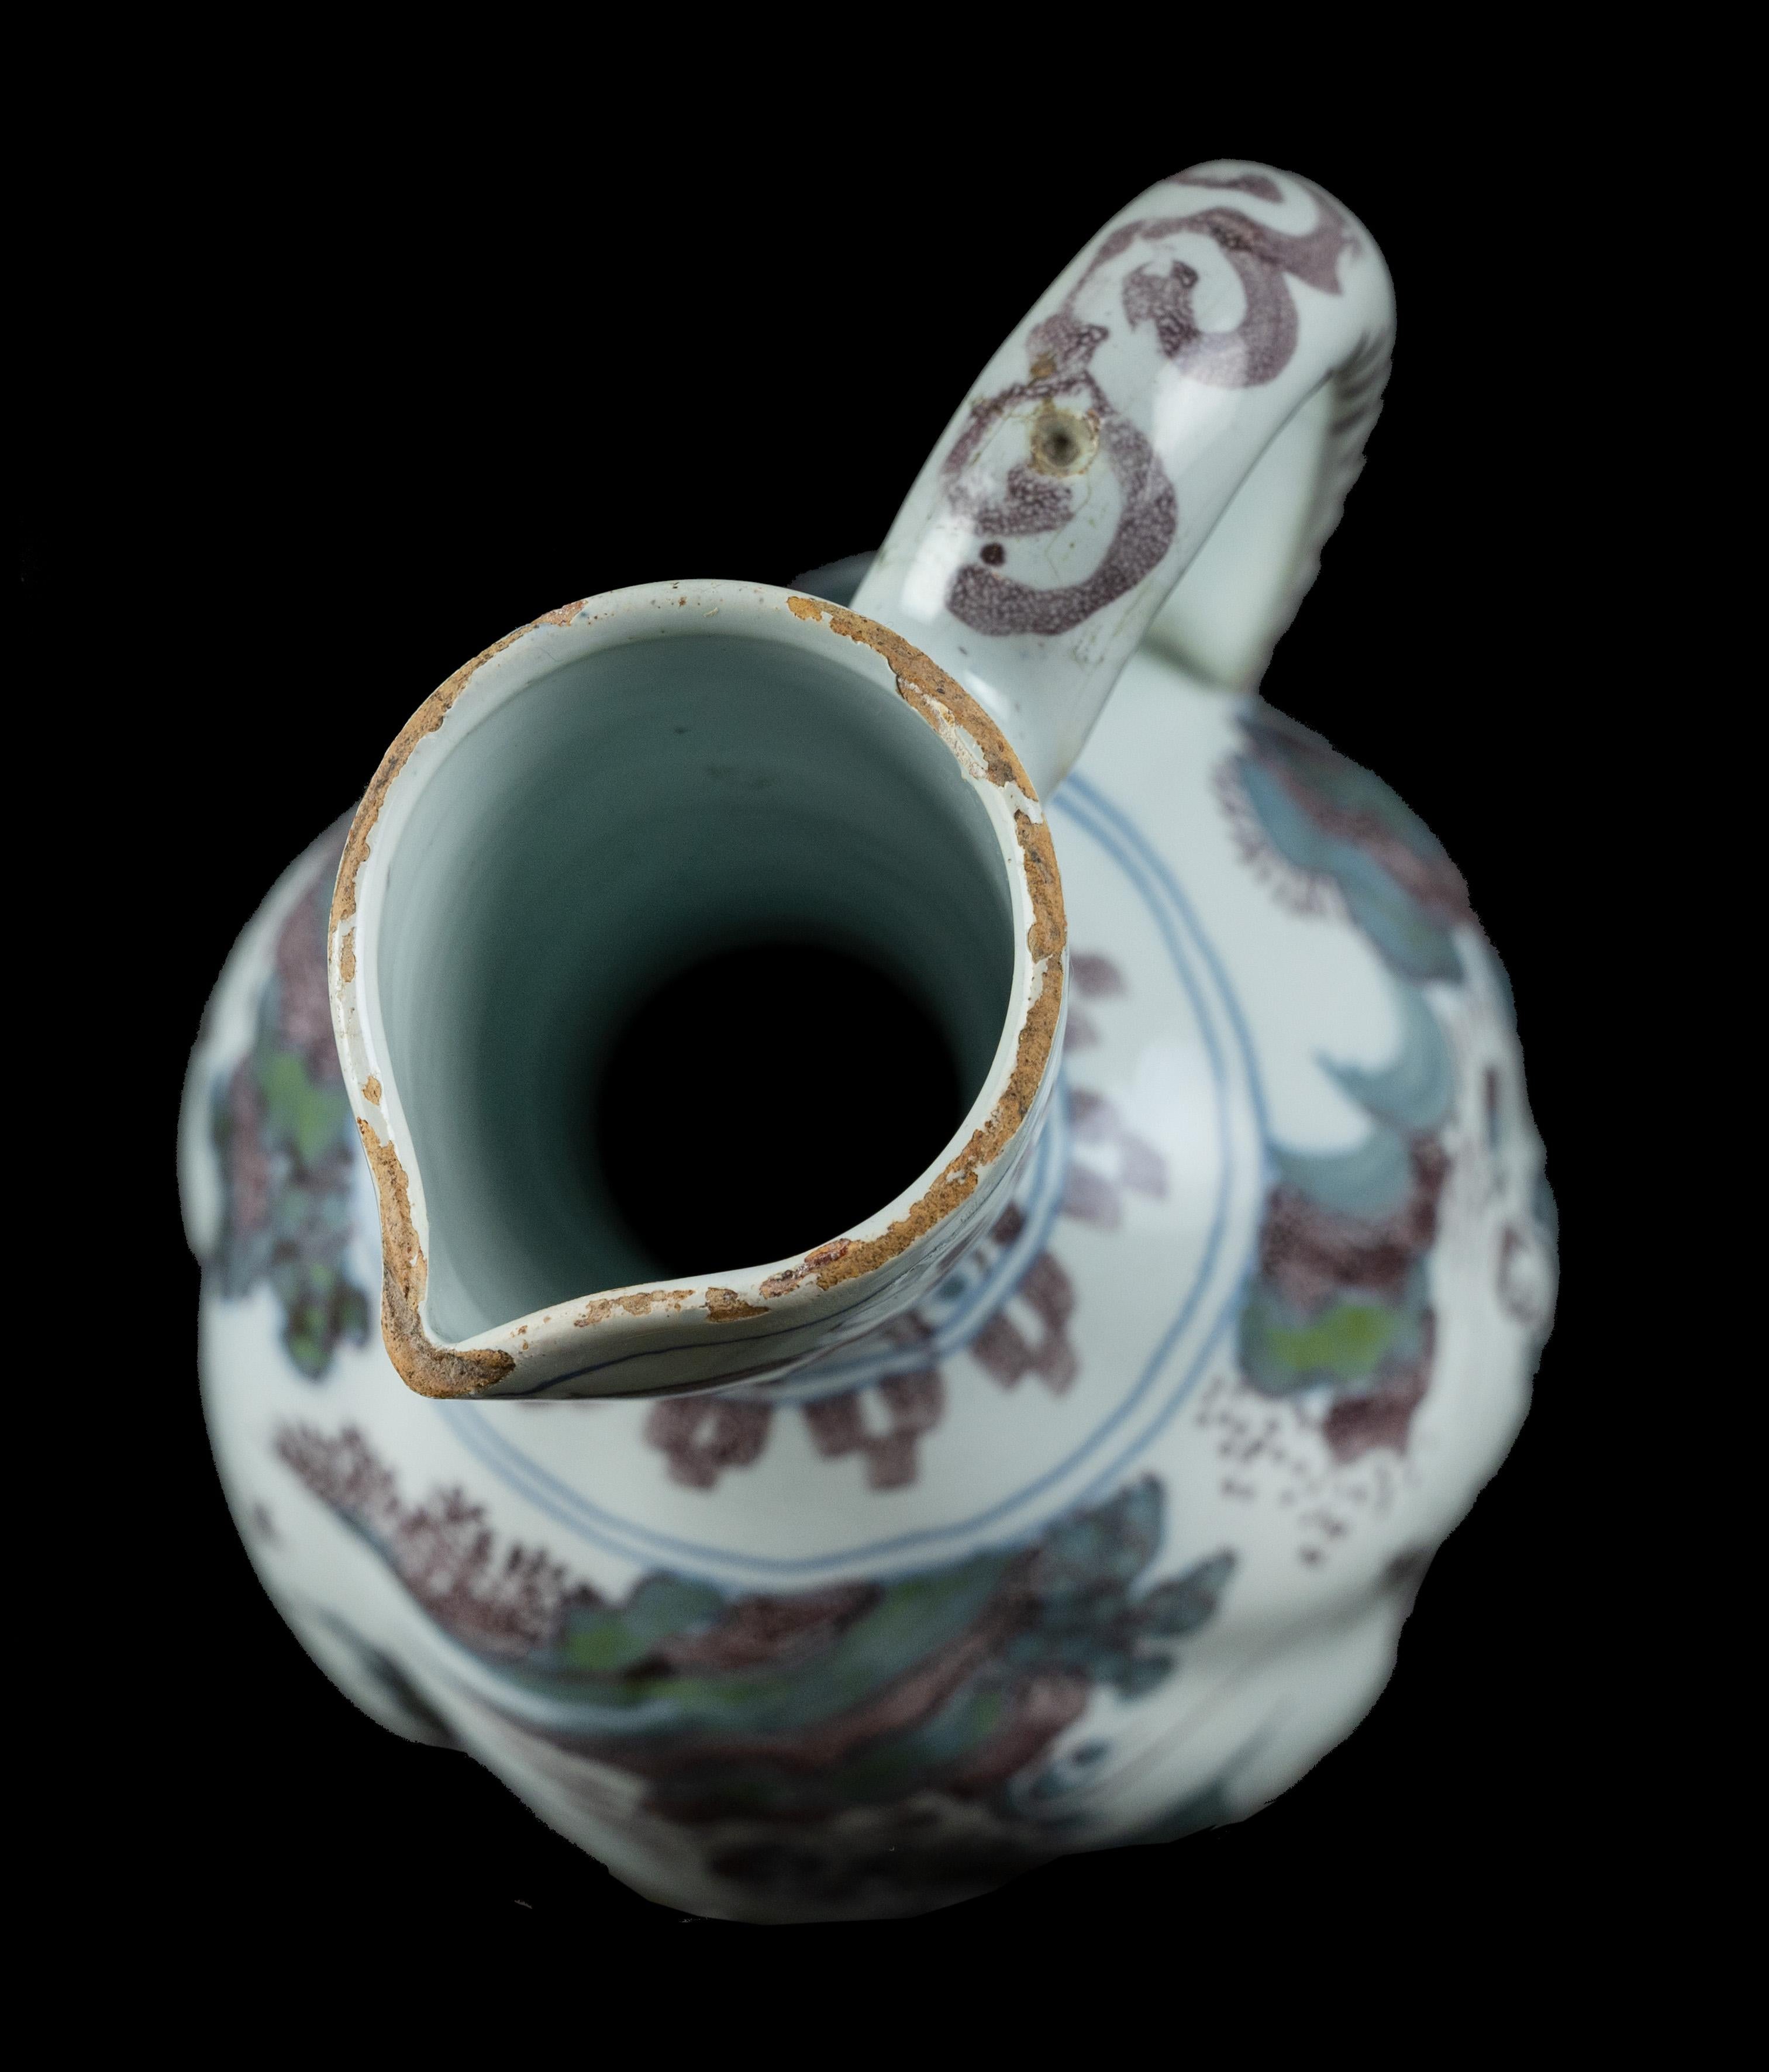 Polychrome chinoiserie wine jug. Delft, circa 1680
The polychrome wine jug has an ovoid and turned body on a low spreading foot, a conical neck with spout and a handle with a scroll finish. The jug is painted in blue, purple and green with a